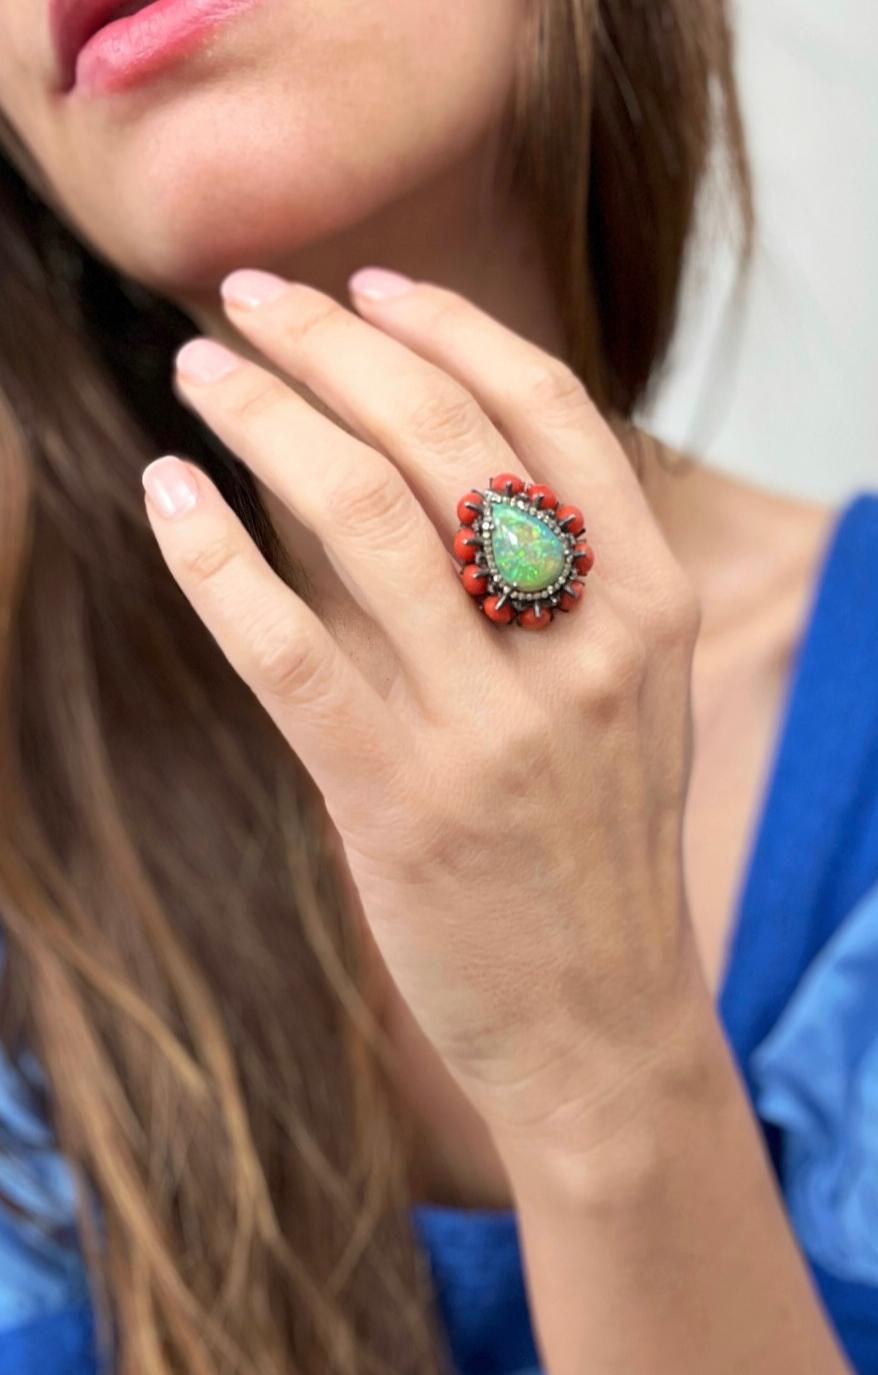 One oxidized sterling silver ring set with one 15x10.5 pear shaped Ethiopian opal, sixty-four round diamonds, approximately 0.58 carat total weight with matching I/J color and SI3 clarity, and ten 7x5mm pear shaped oxblood coral stones.  The ring is